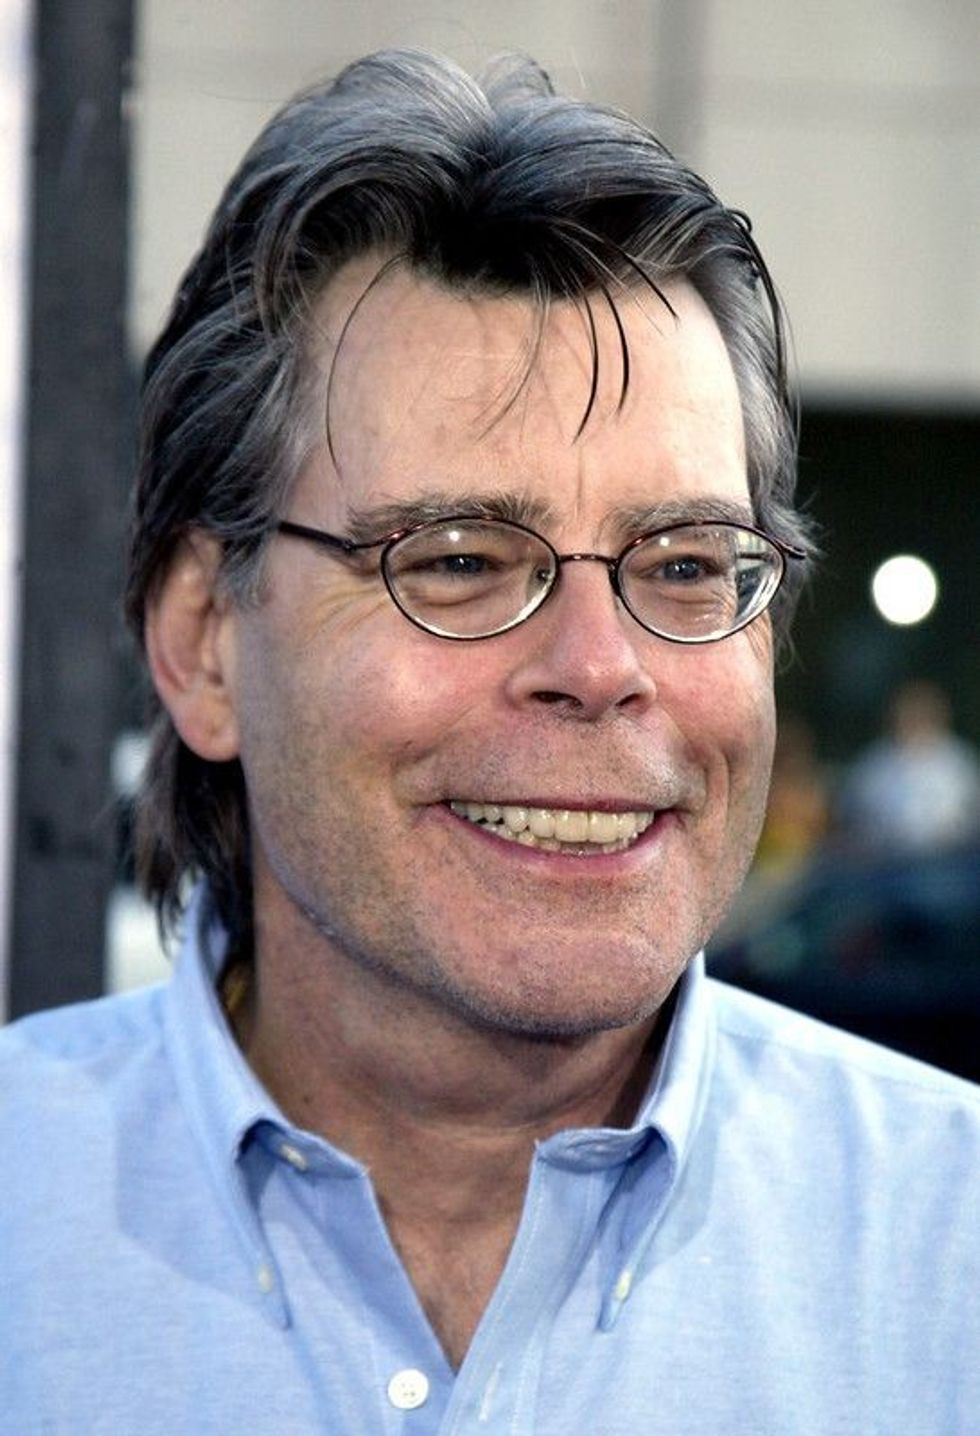 Image of Stephen King from an event